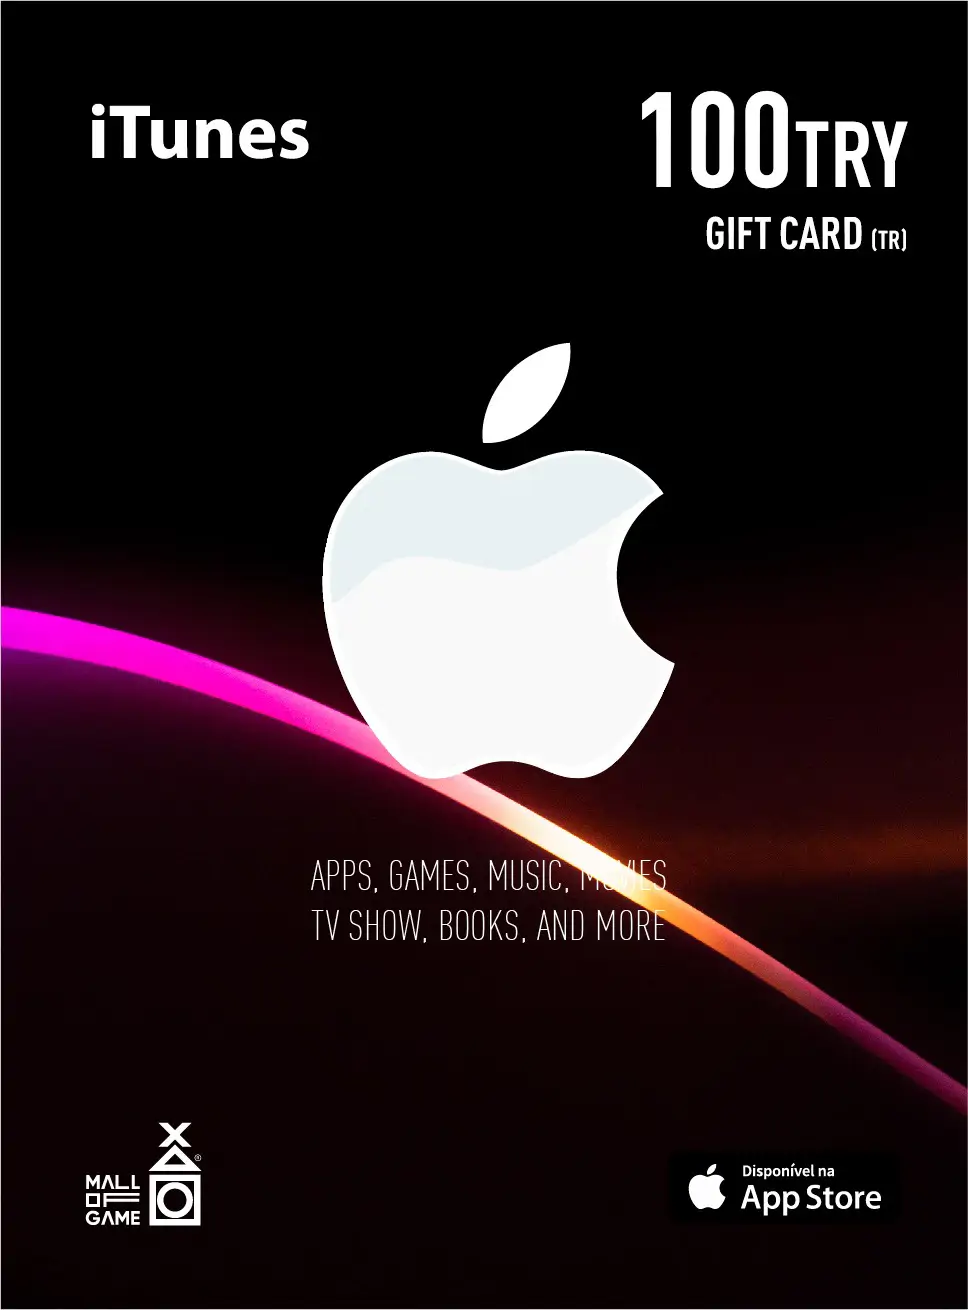 iTunes 100TRY Gift Card (TR)